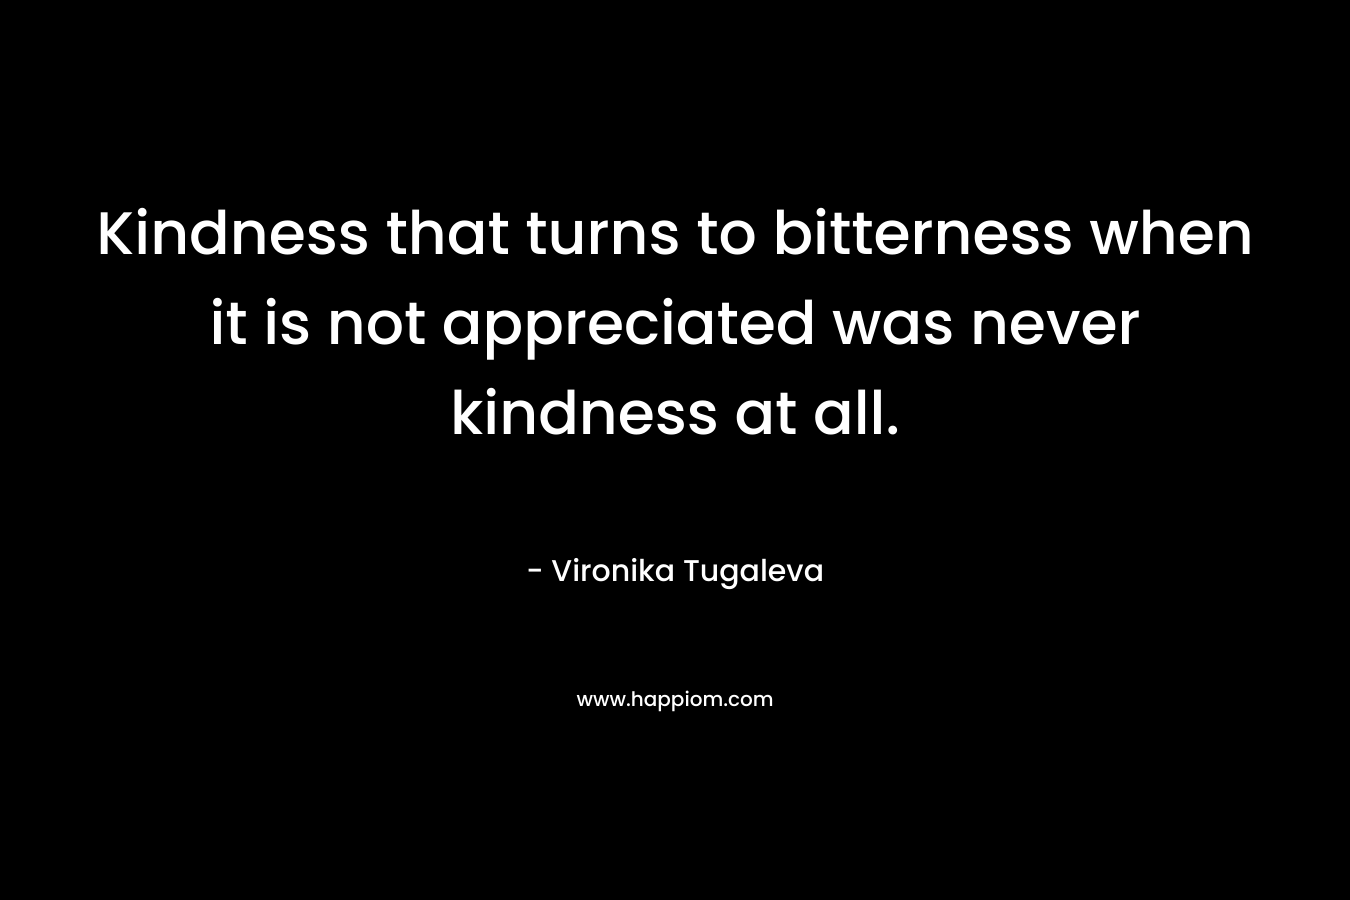 Kindness that turns to bitterness when it is not appreciated was never kindness at all.